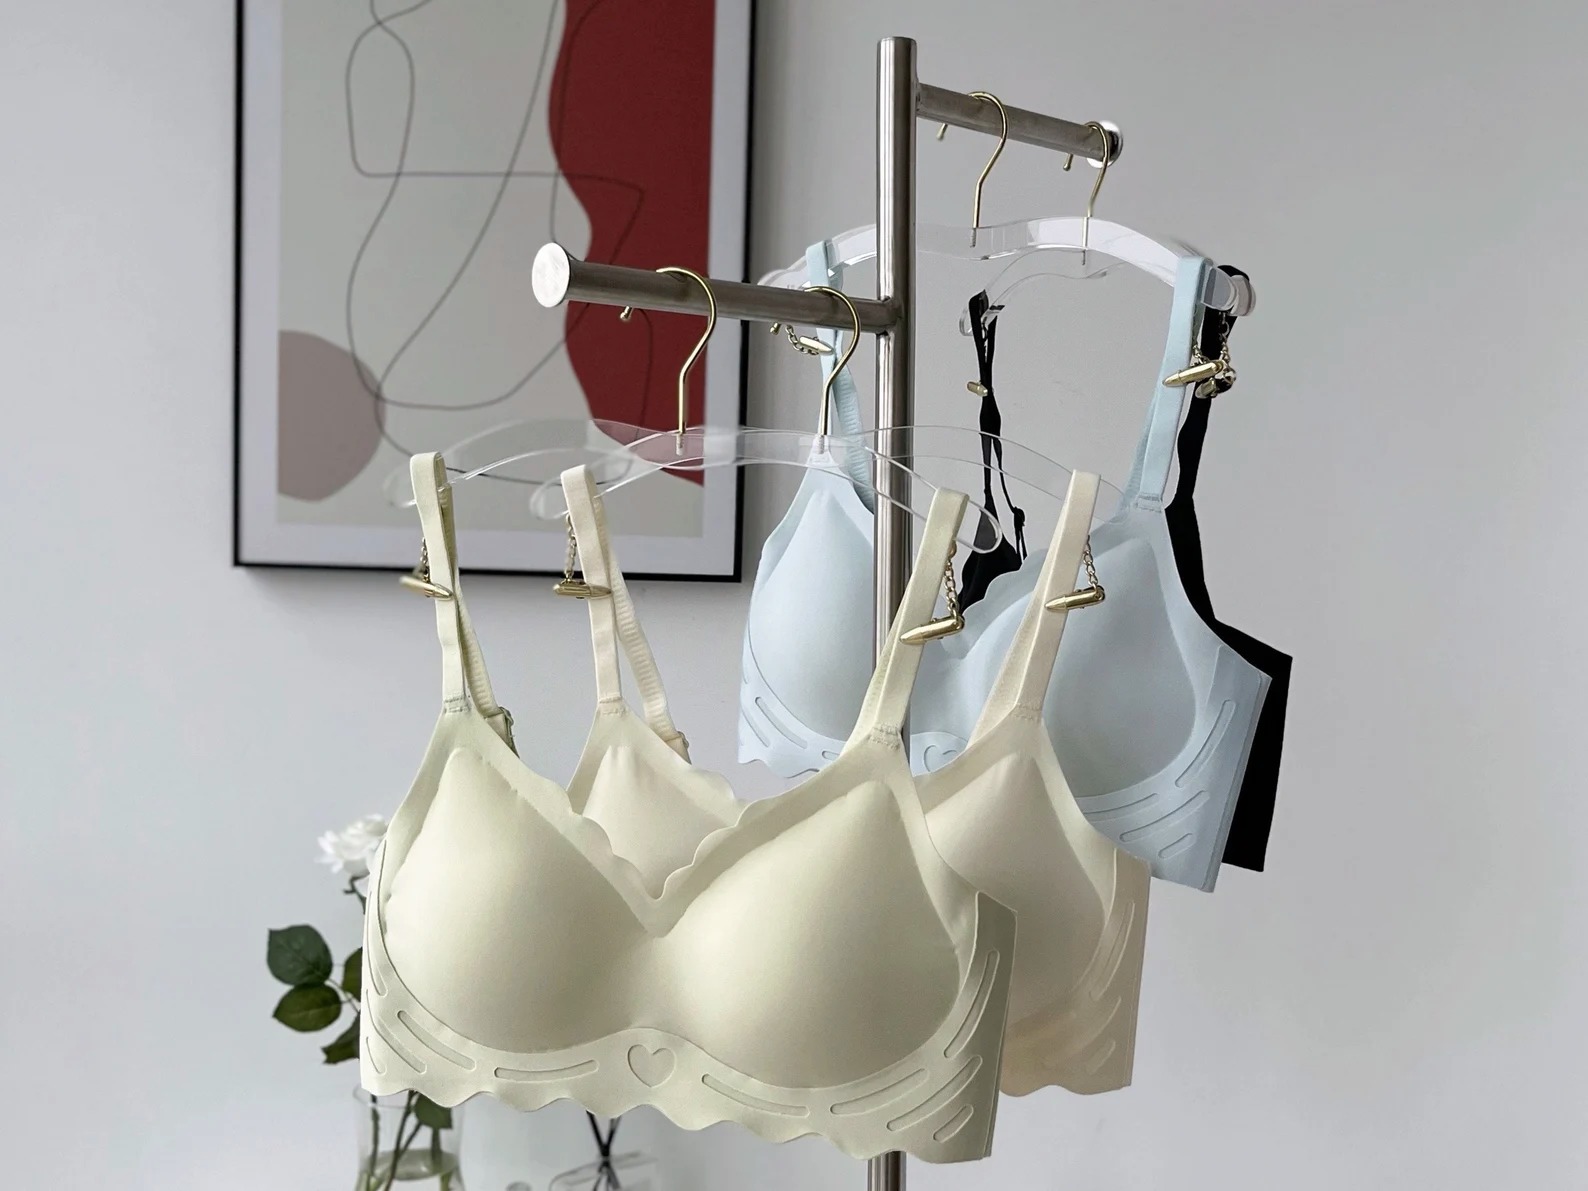 Seamless Smoothing Full Coverage Bra Wireless Everyday Bra with Cool  Comfort Fabric Push Up Thin Soft Back Smoothing Bra Skin Color Size 46/105D  